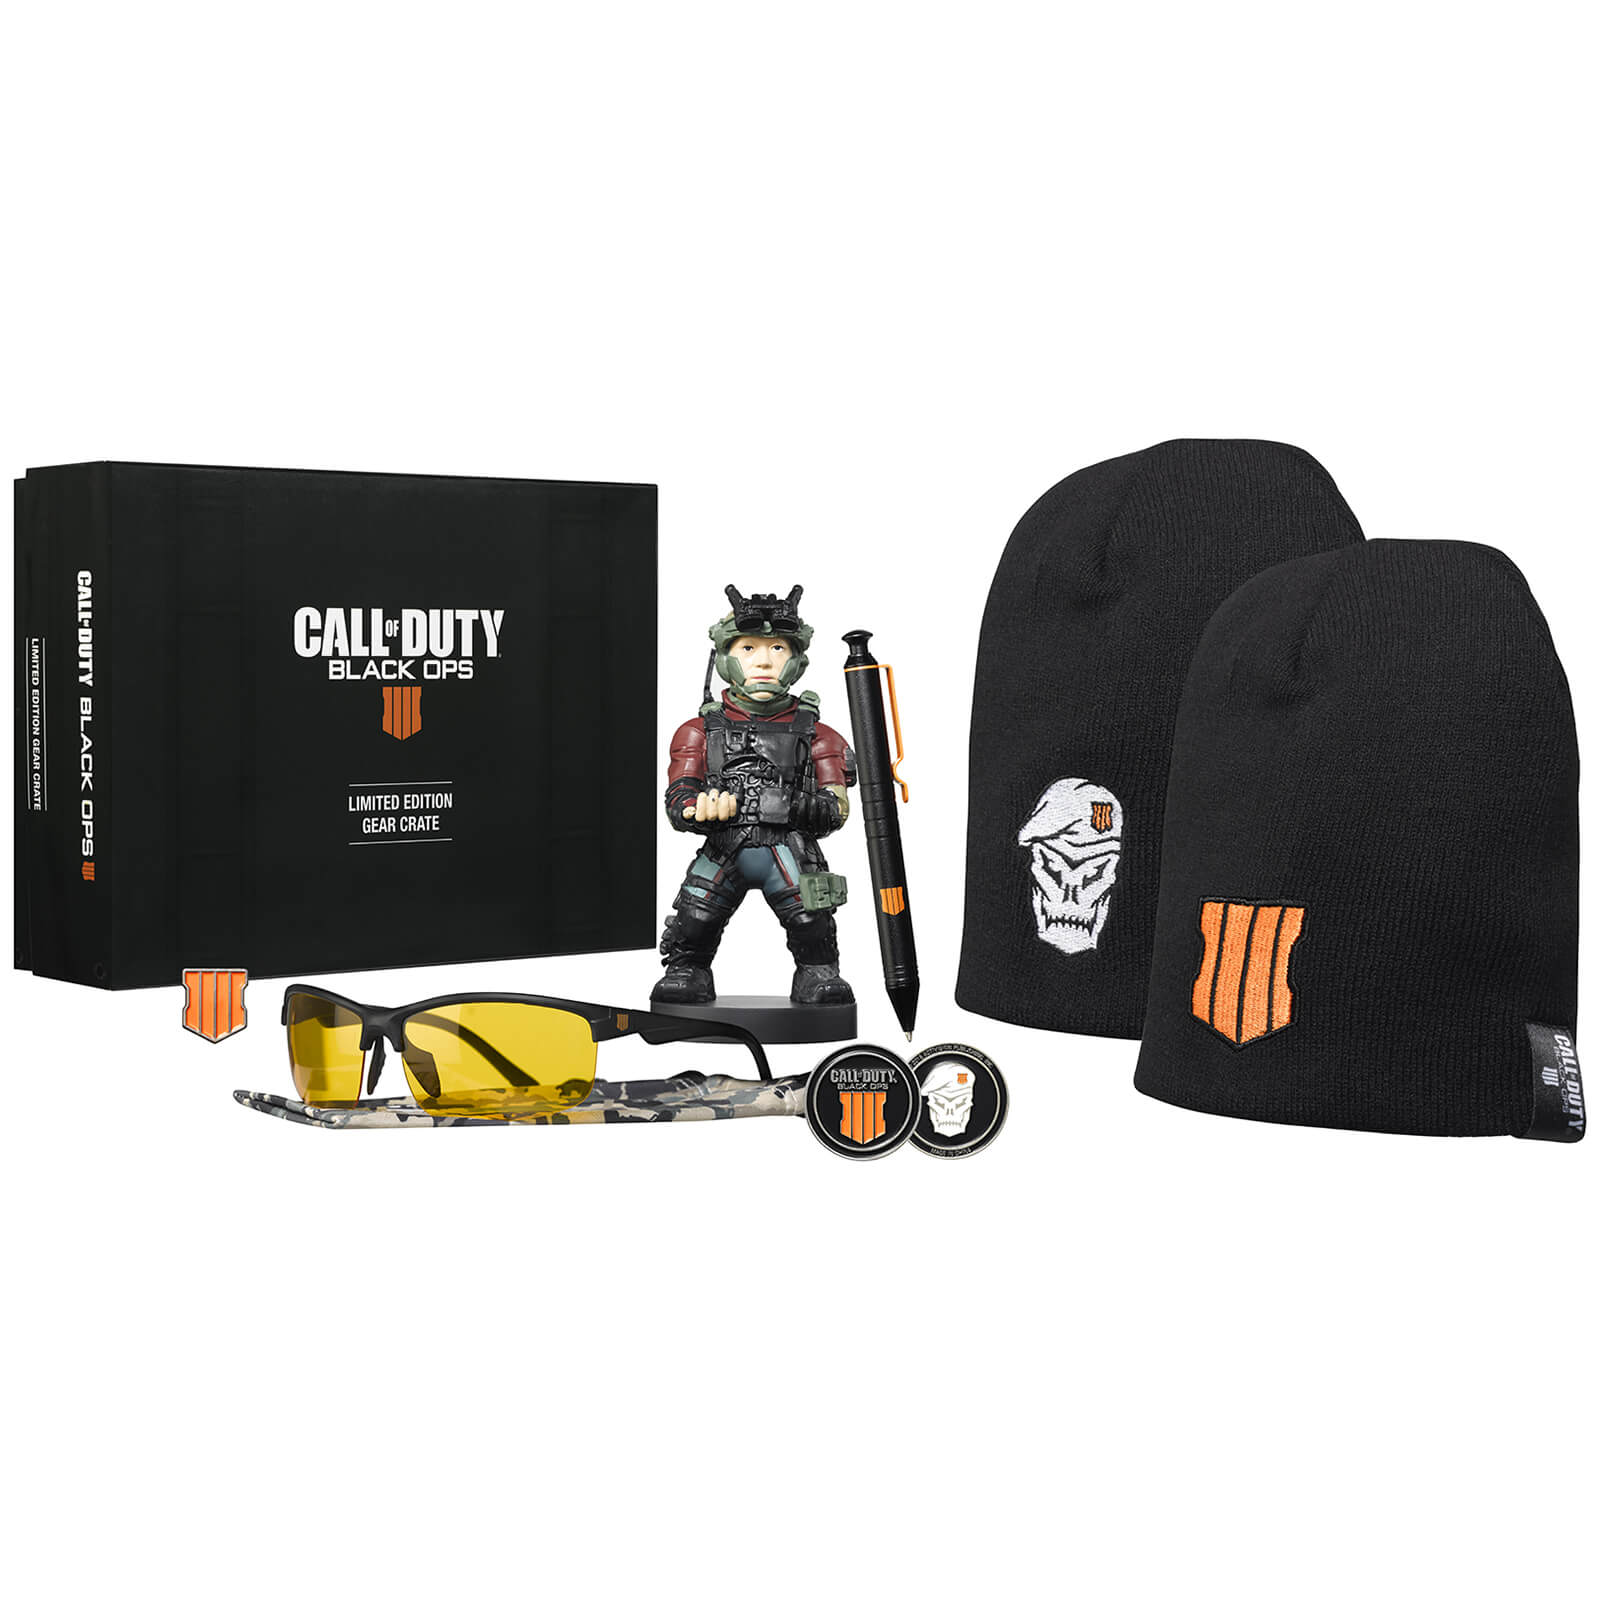 Call of Duty Black Ops IV Collectable Big Box - Includes Mini Cable Guy